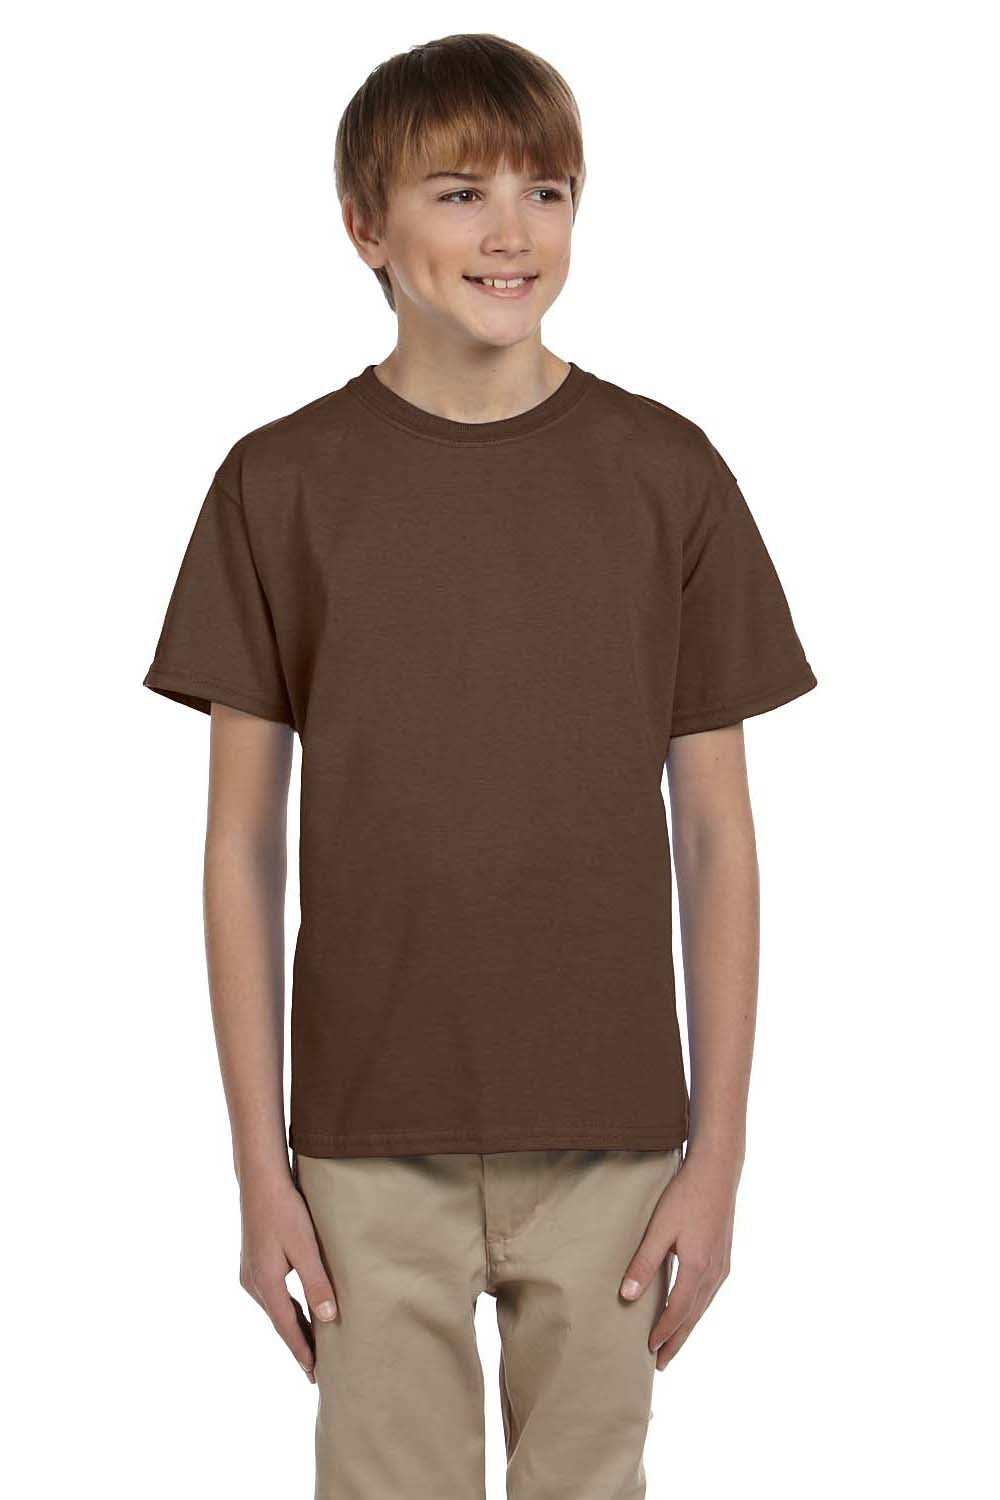 Fruit Of The Loom 3931B Youth HD Jersey Short Sleeve Crewneck T-Shirt Chocolate Brown Front